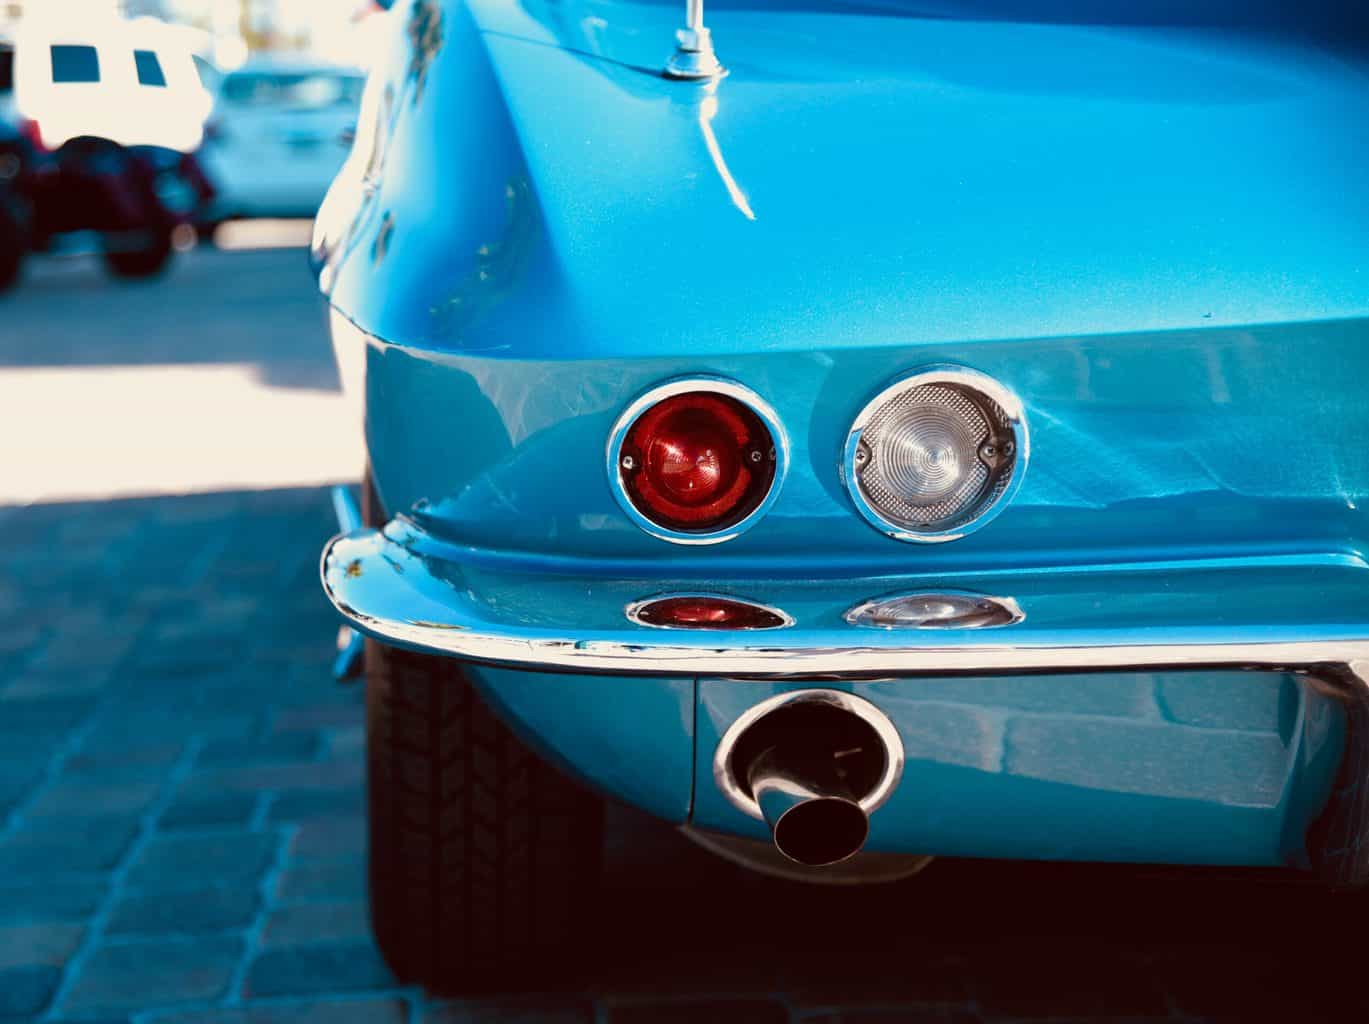 A rear view of a blue car with exhaust